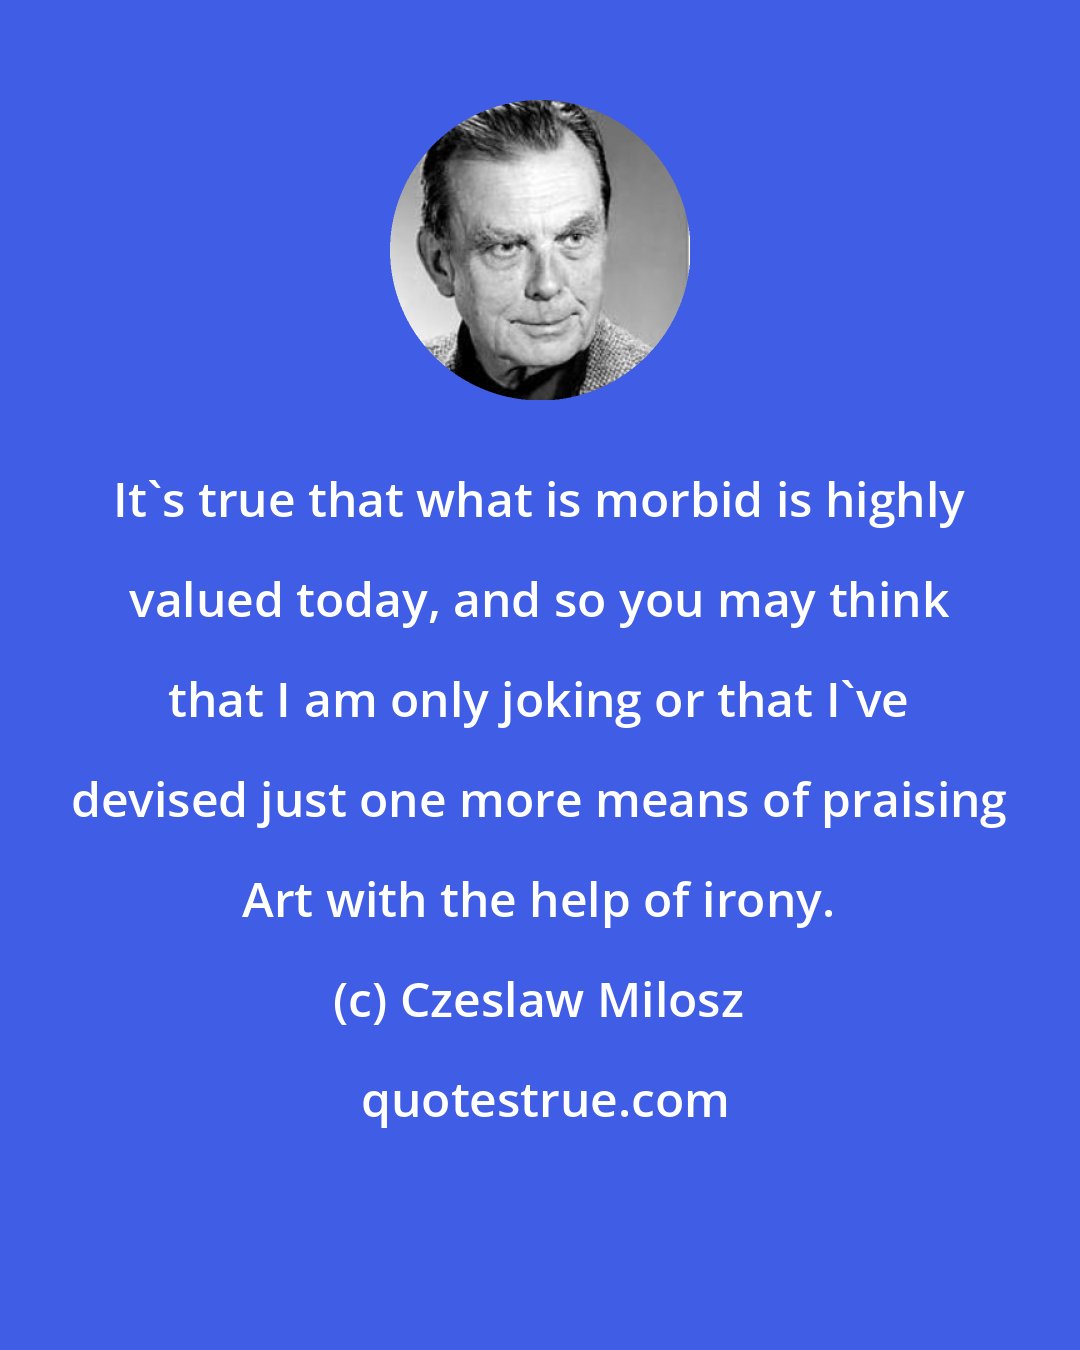 Czeslaw Milosz: It's true that what is morbid is highly valued today, and so you may think that I am only joking or that I've devised just one more means of praising Art with the help of irony.